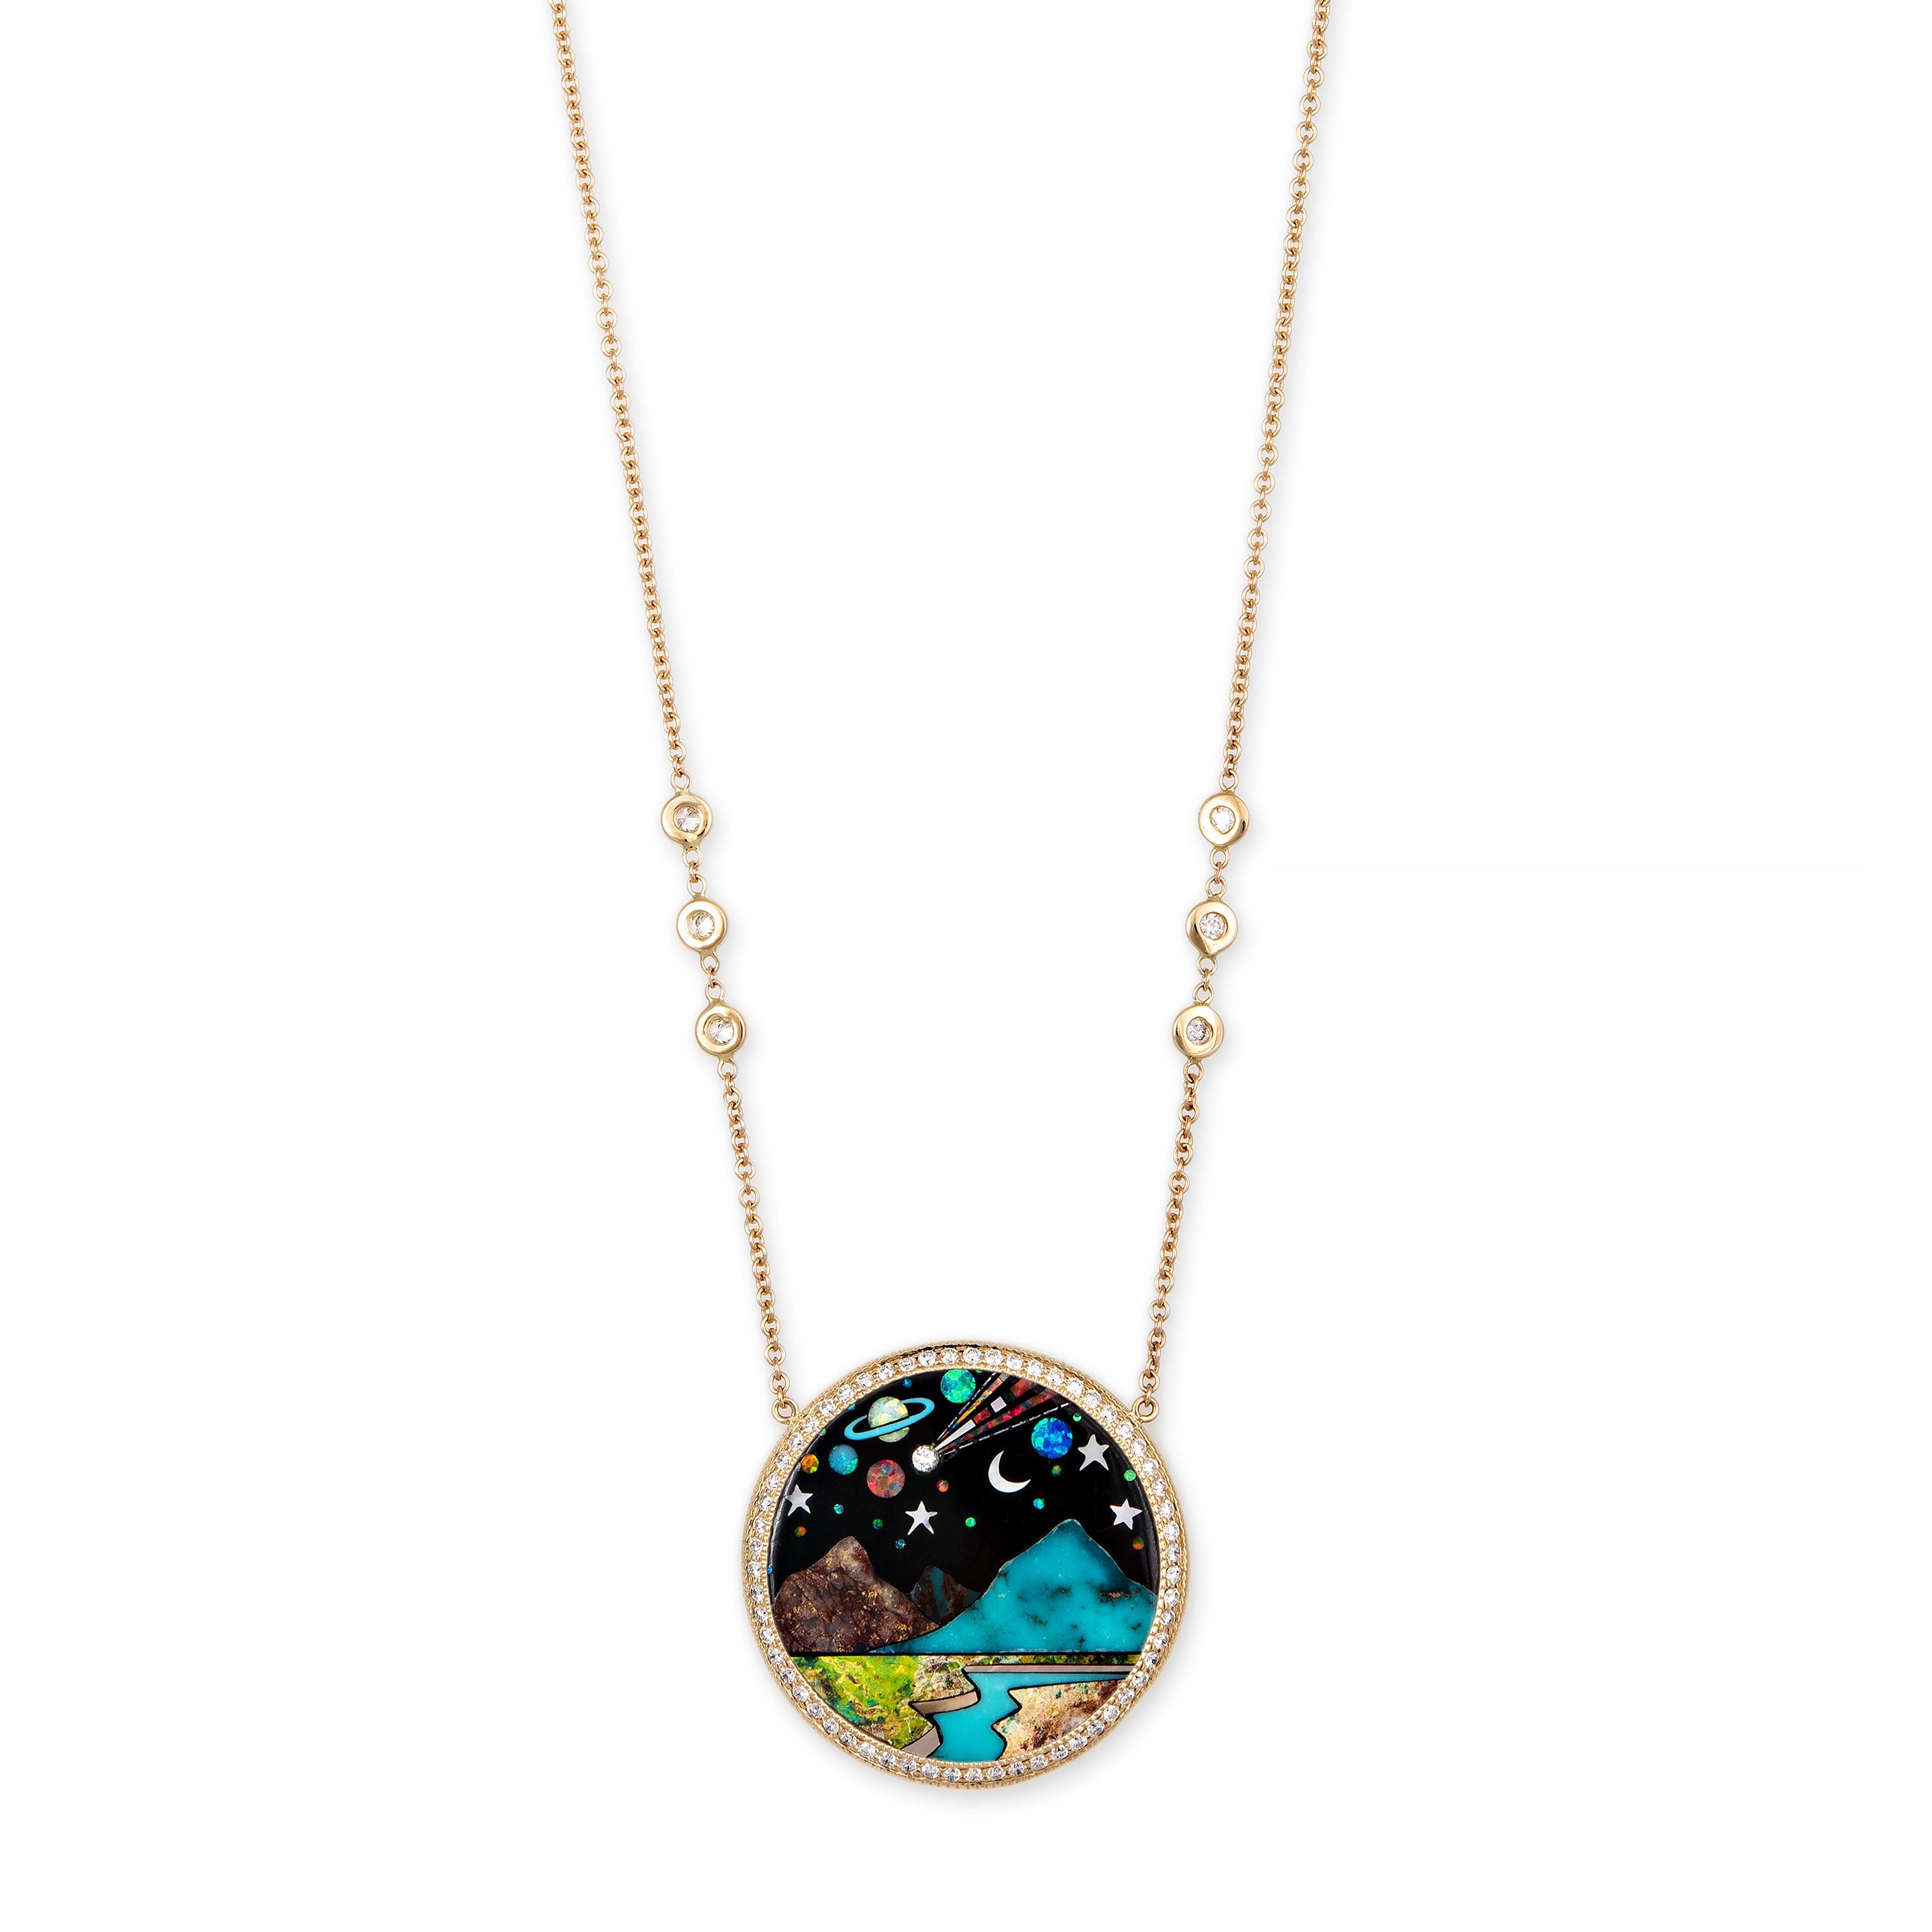 PAVE ROUND ONYX + OPAL SCENIC GALAXY INLAY NECKLACE